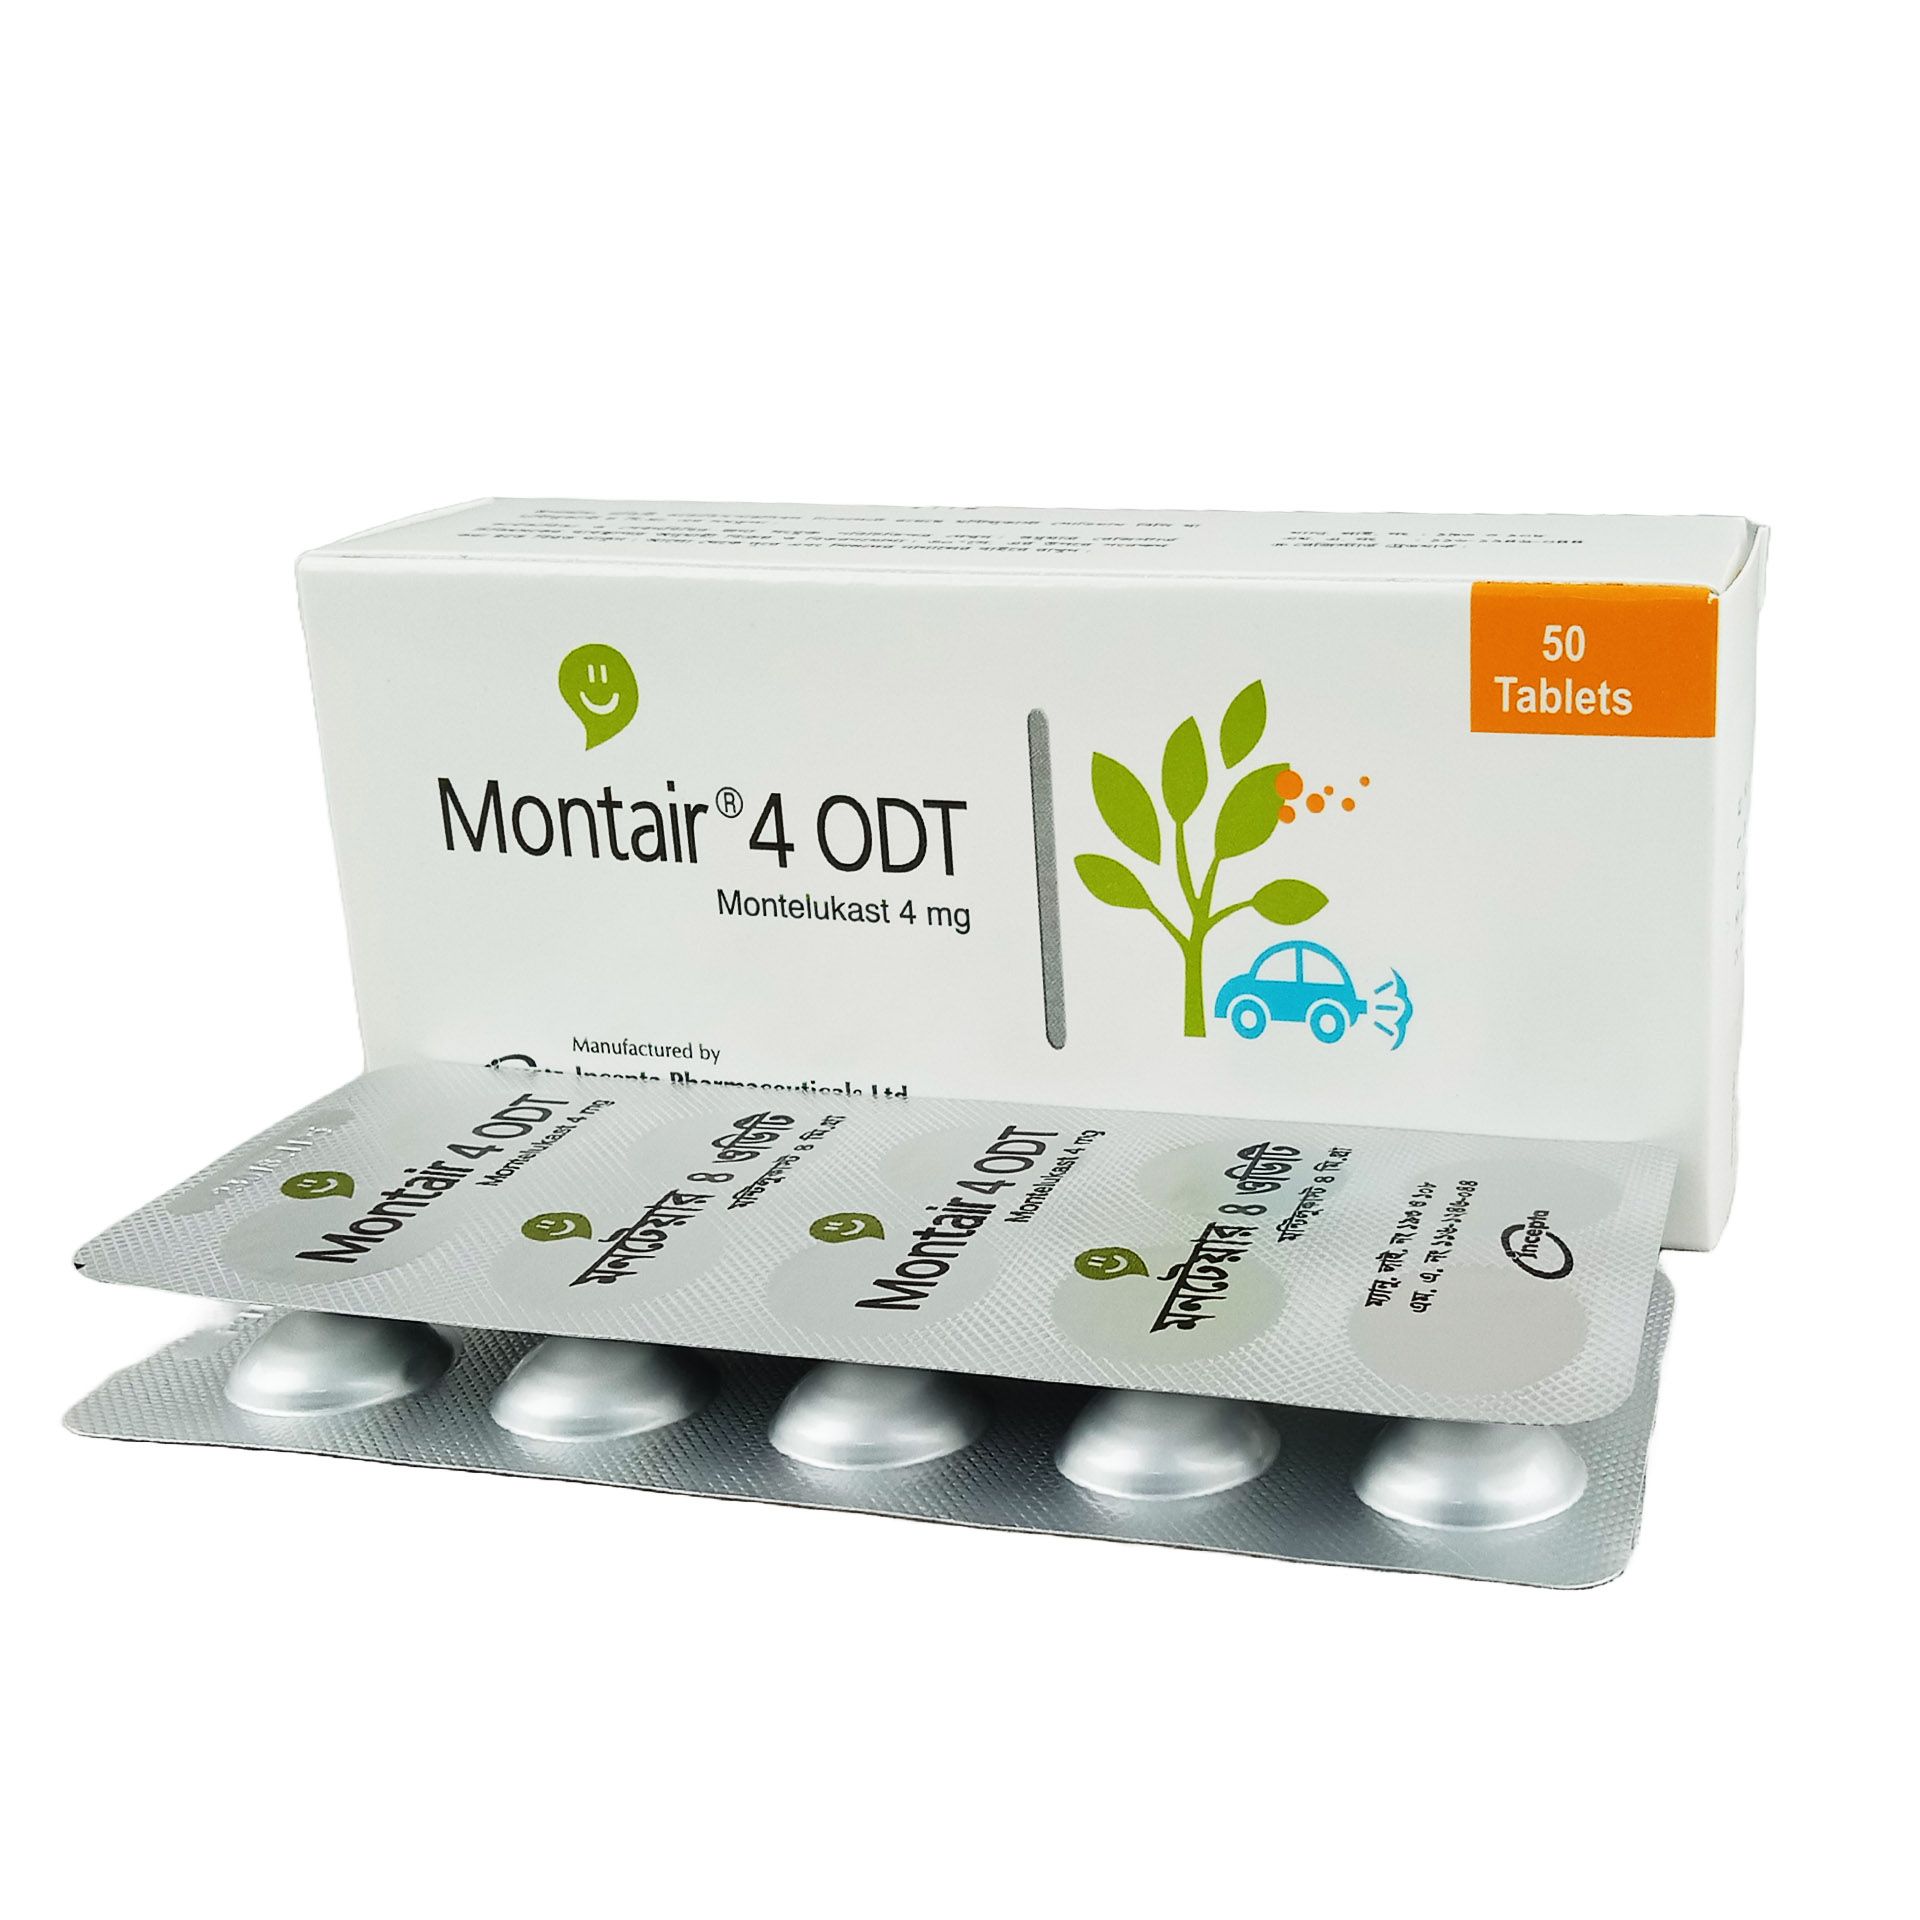 Montair 4 ODT 4mg Tablet